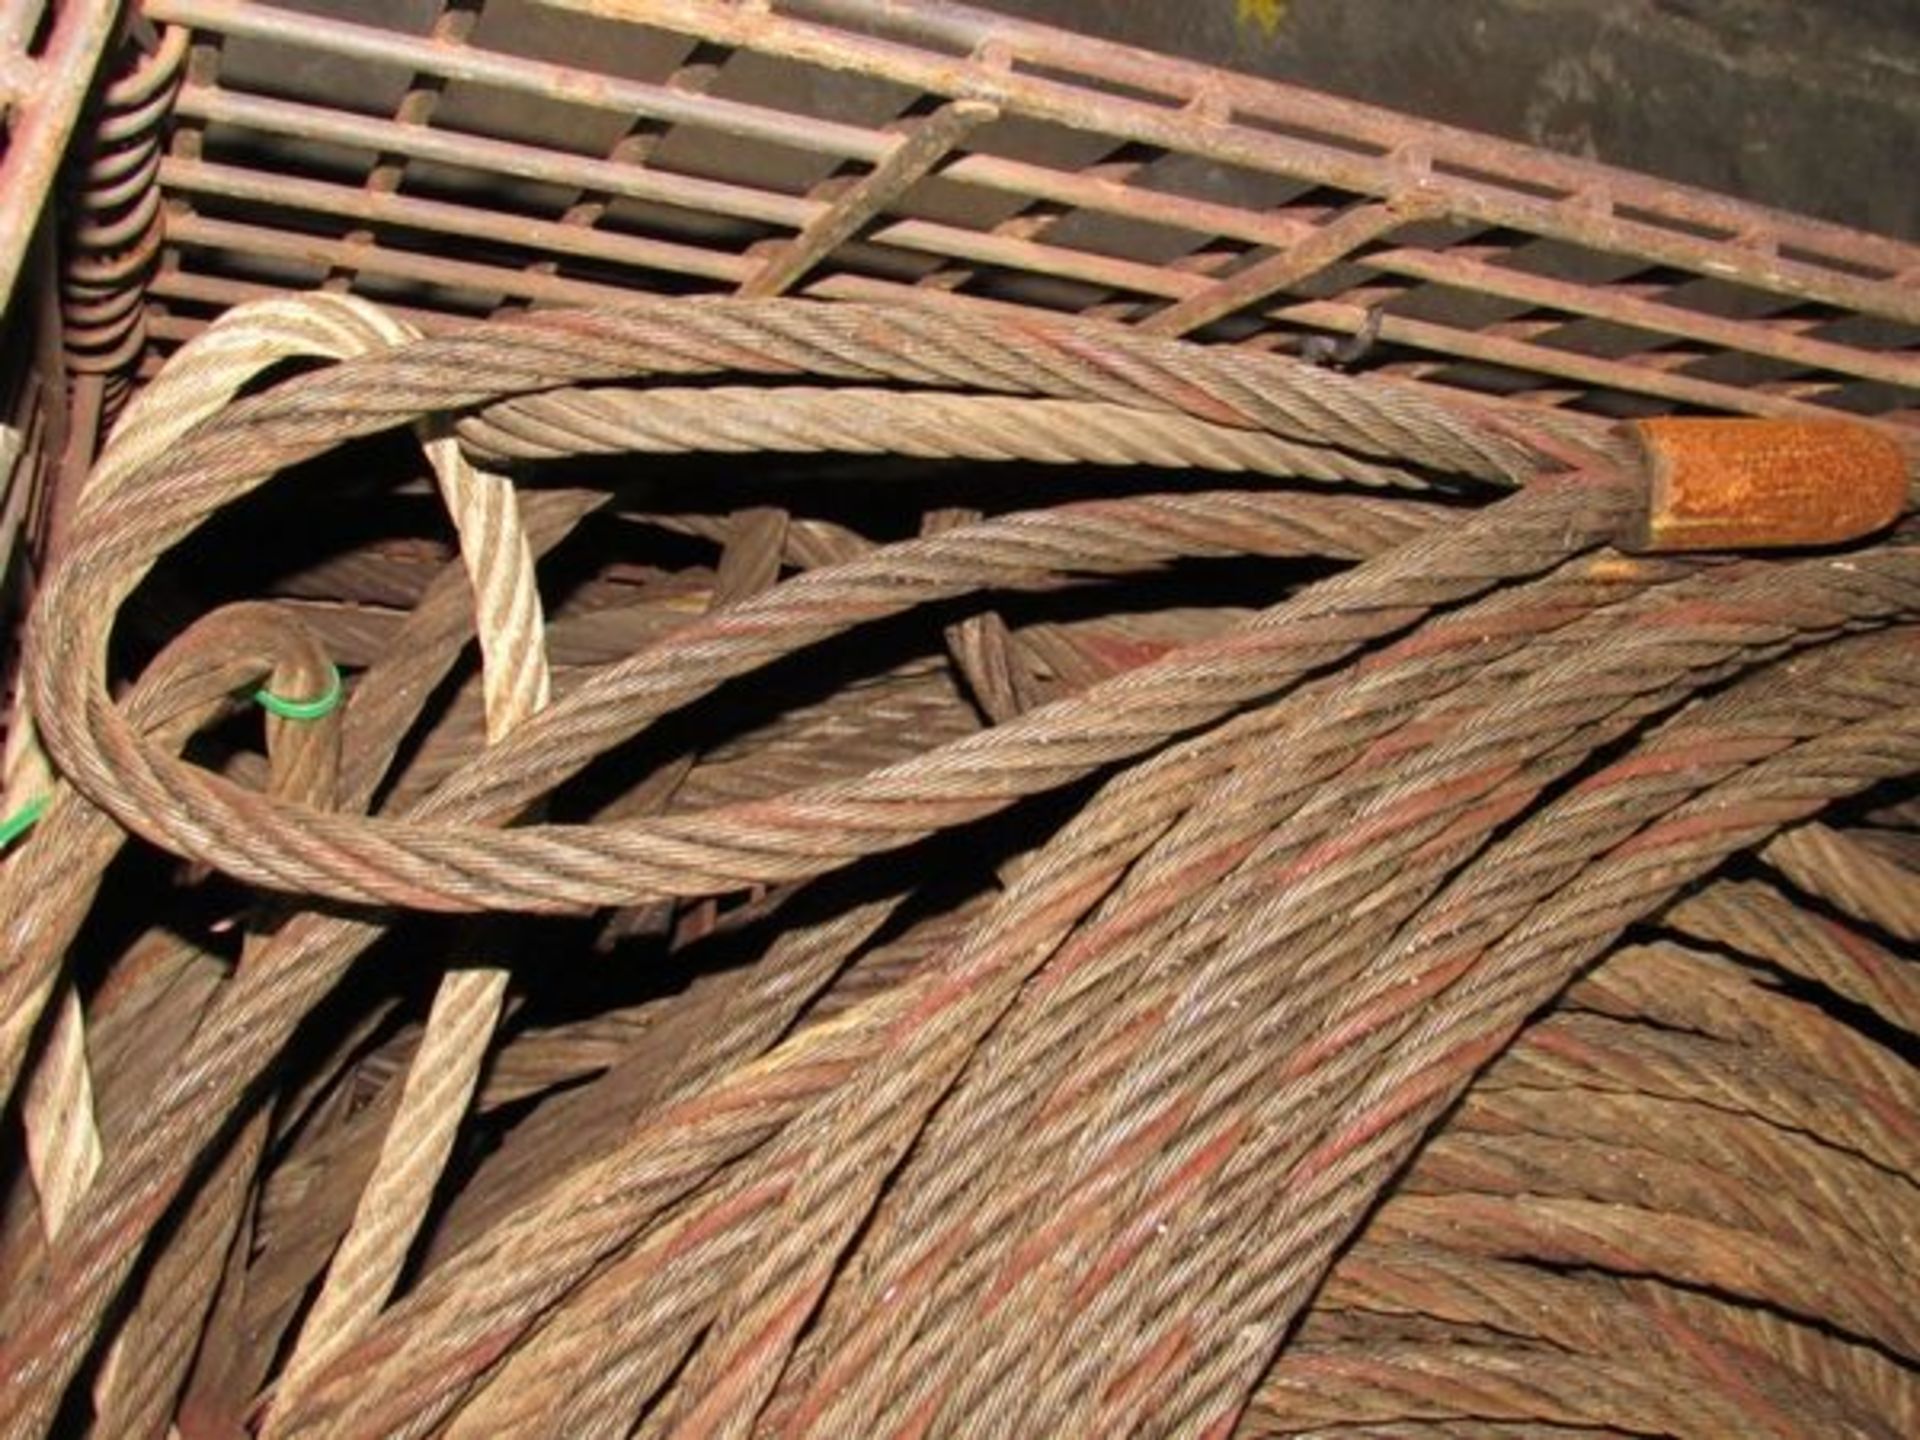 Assorted Braided Steel Lifting Slings- MFR - Dakota Riggers, Total Tool Sizes Range From 1/2" to 3/ - Image 5 of 8